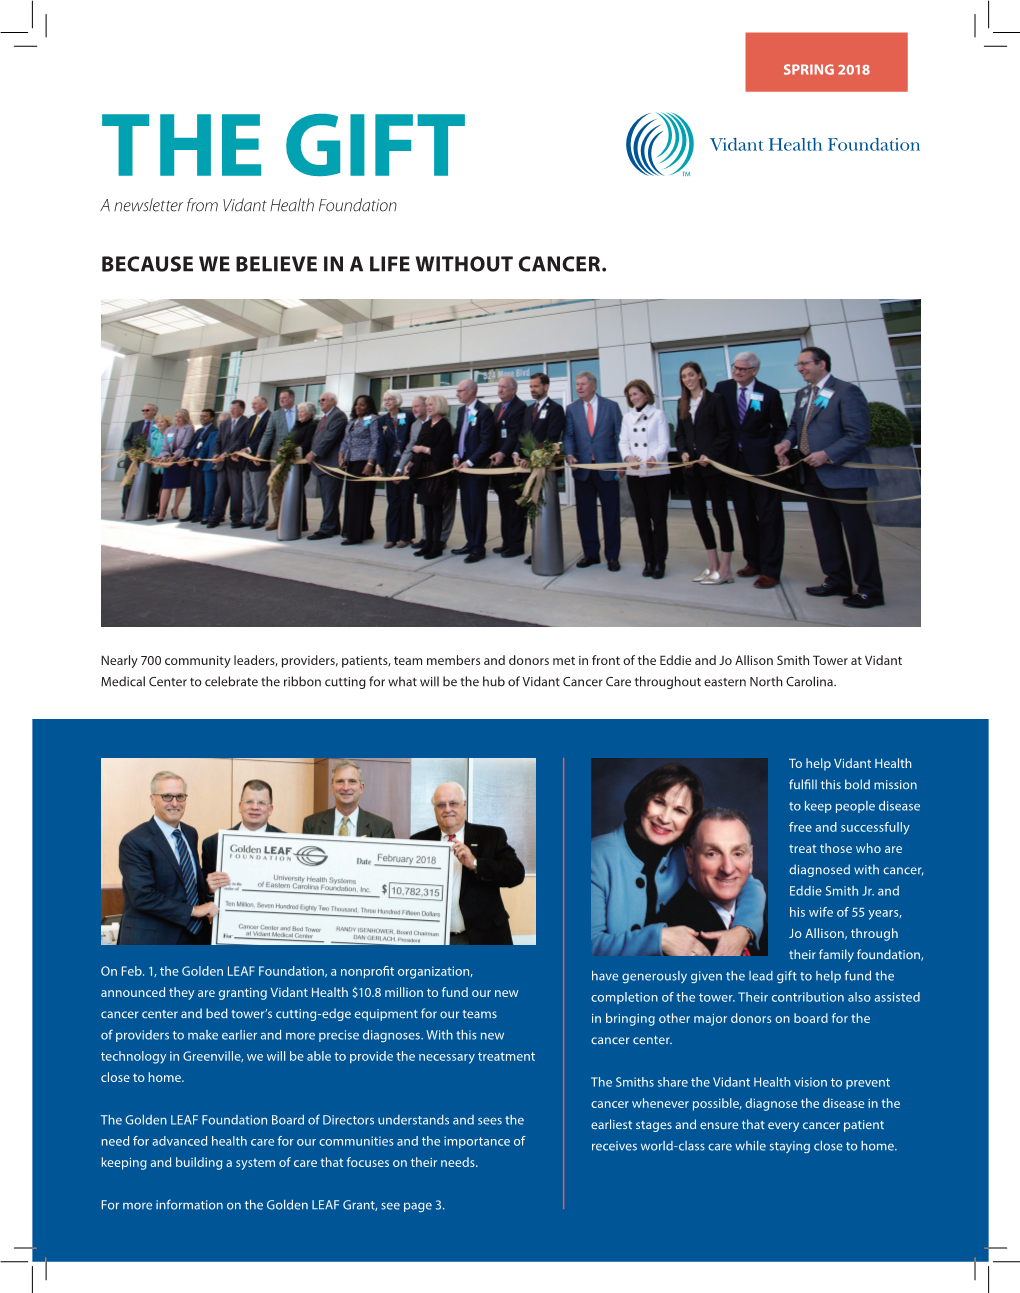 THE GIFT a Newsletter from Vidant Health Foundation